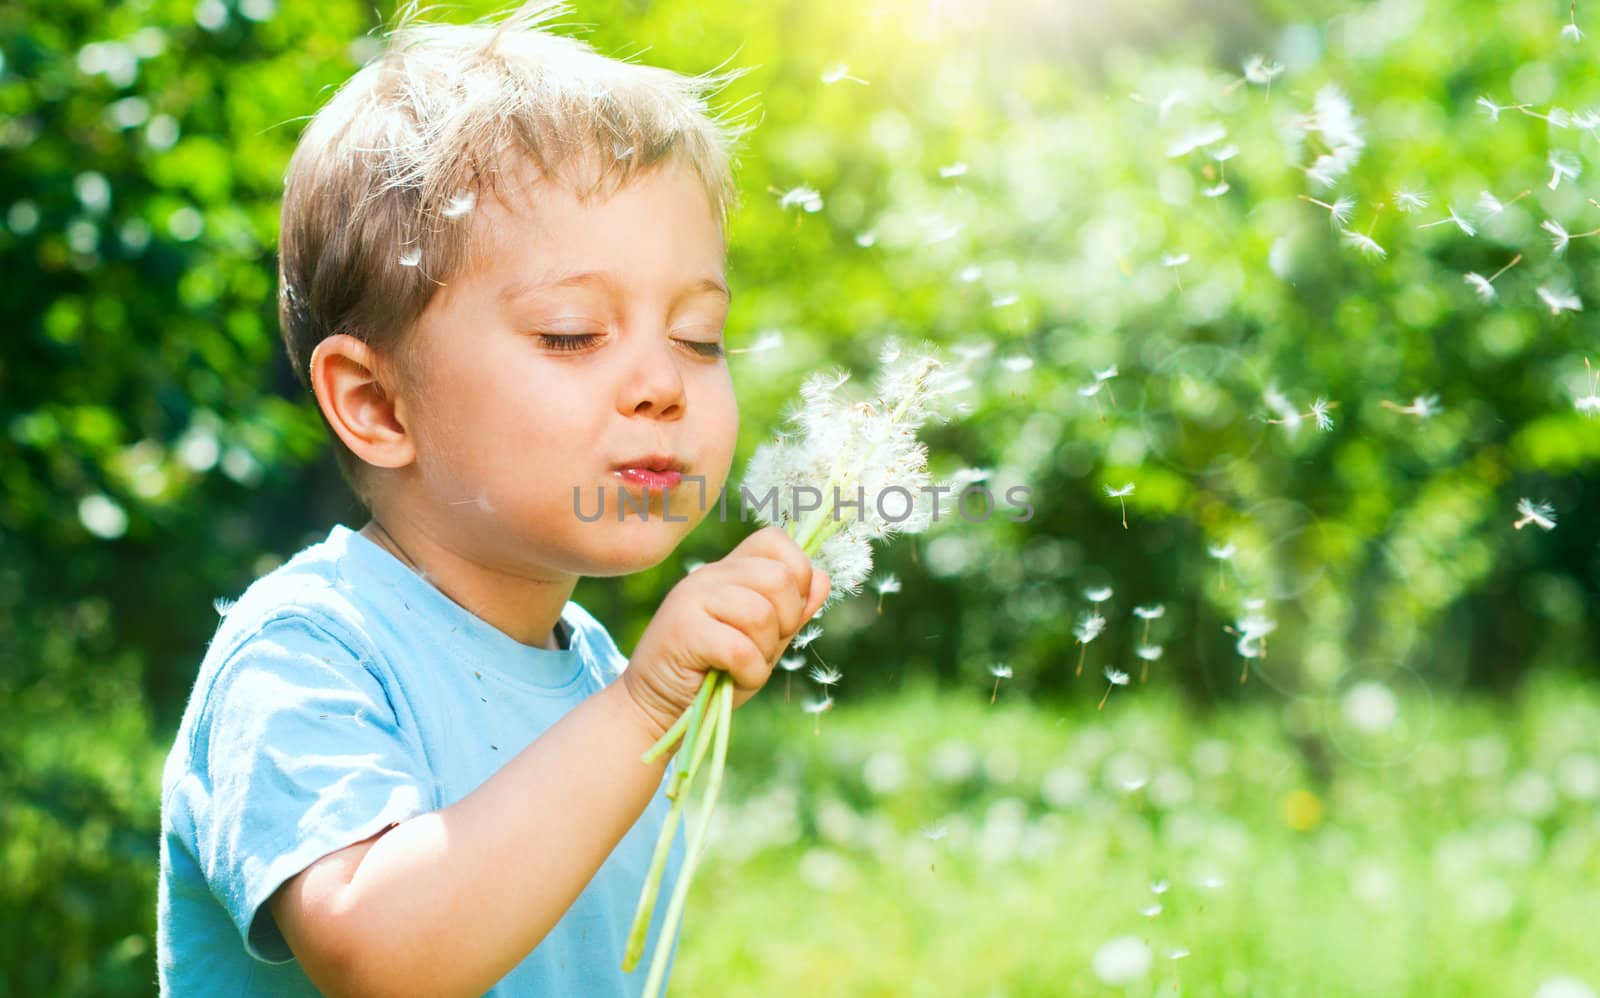 Cute 2 years old boy with dandelion outdoors at sunny summer day